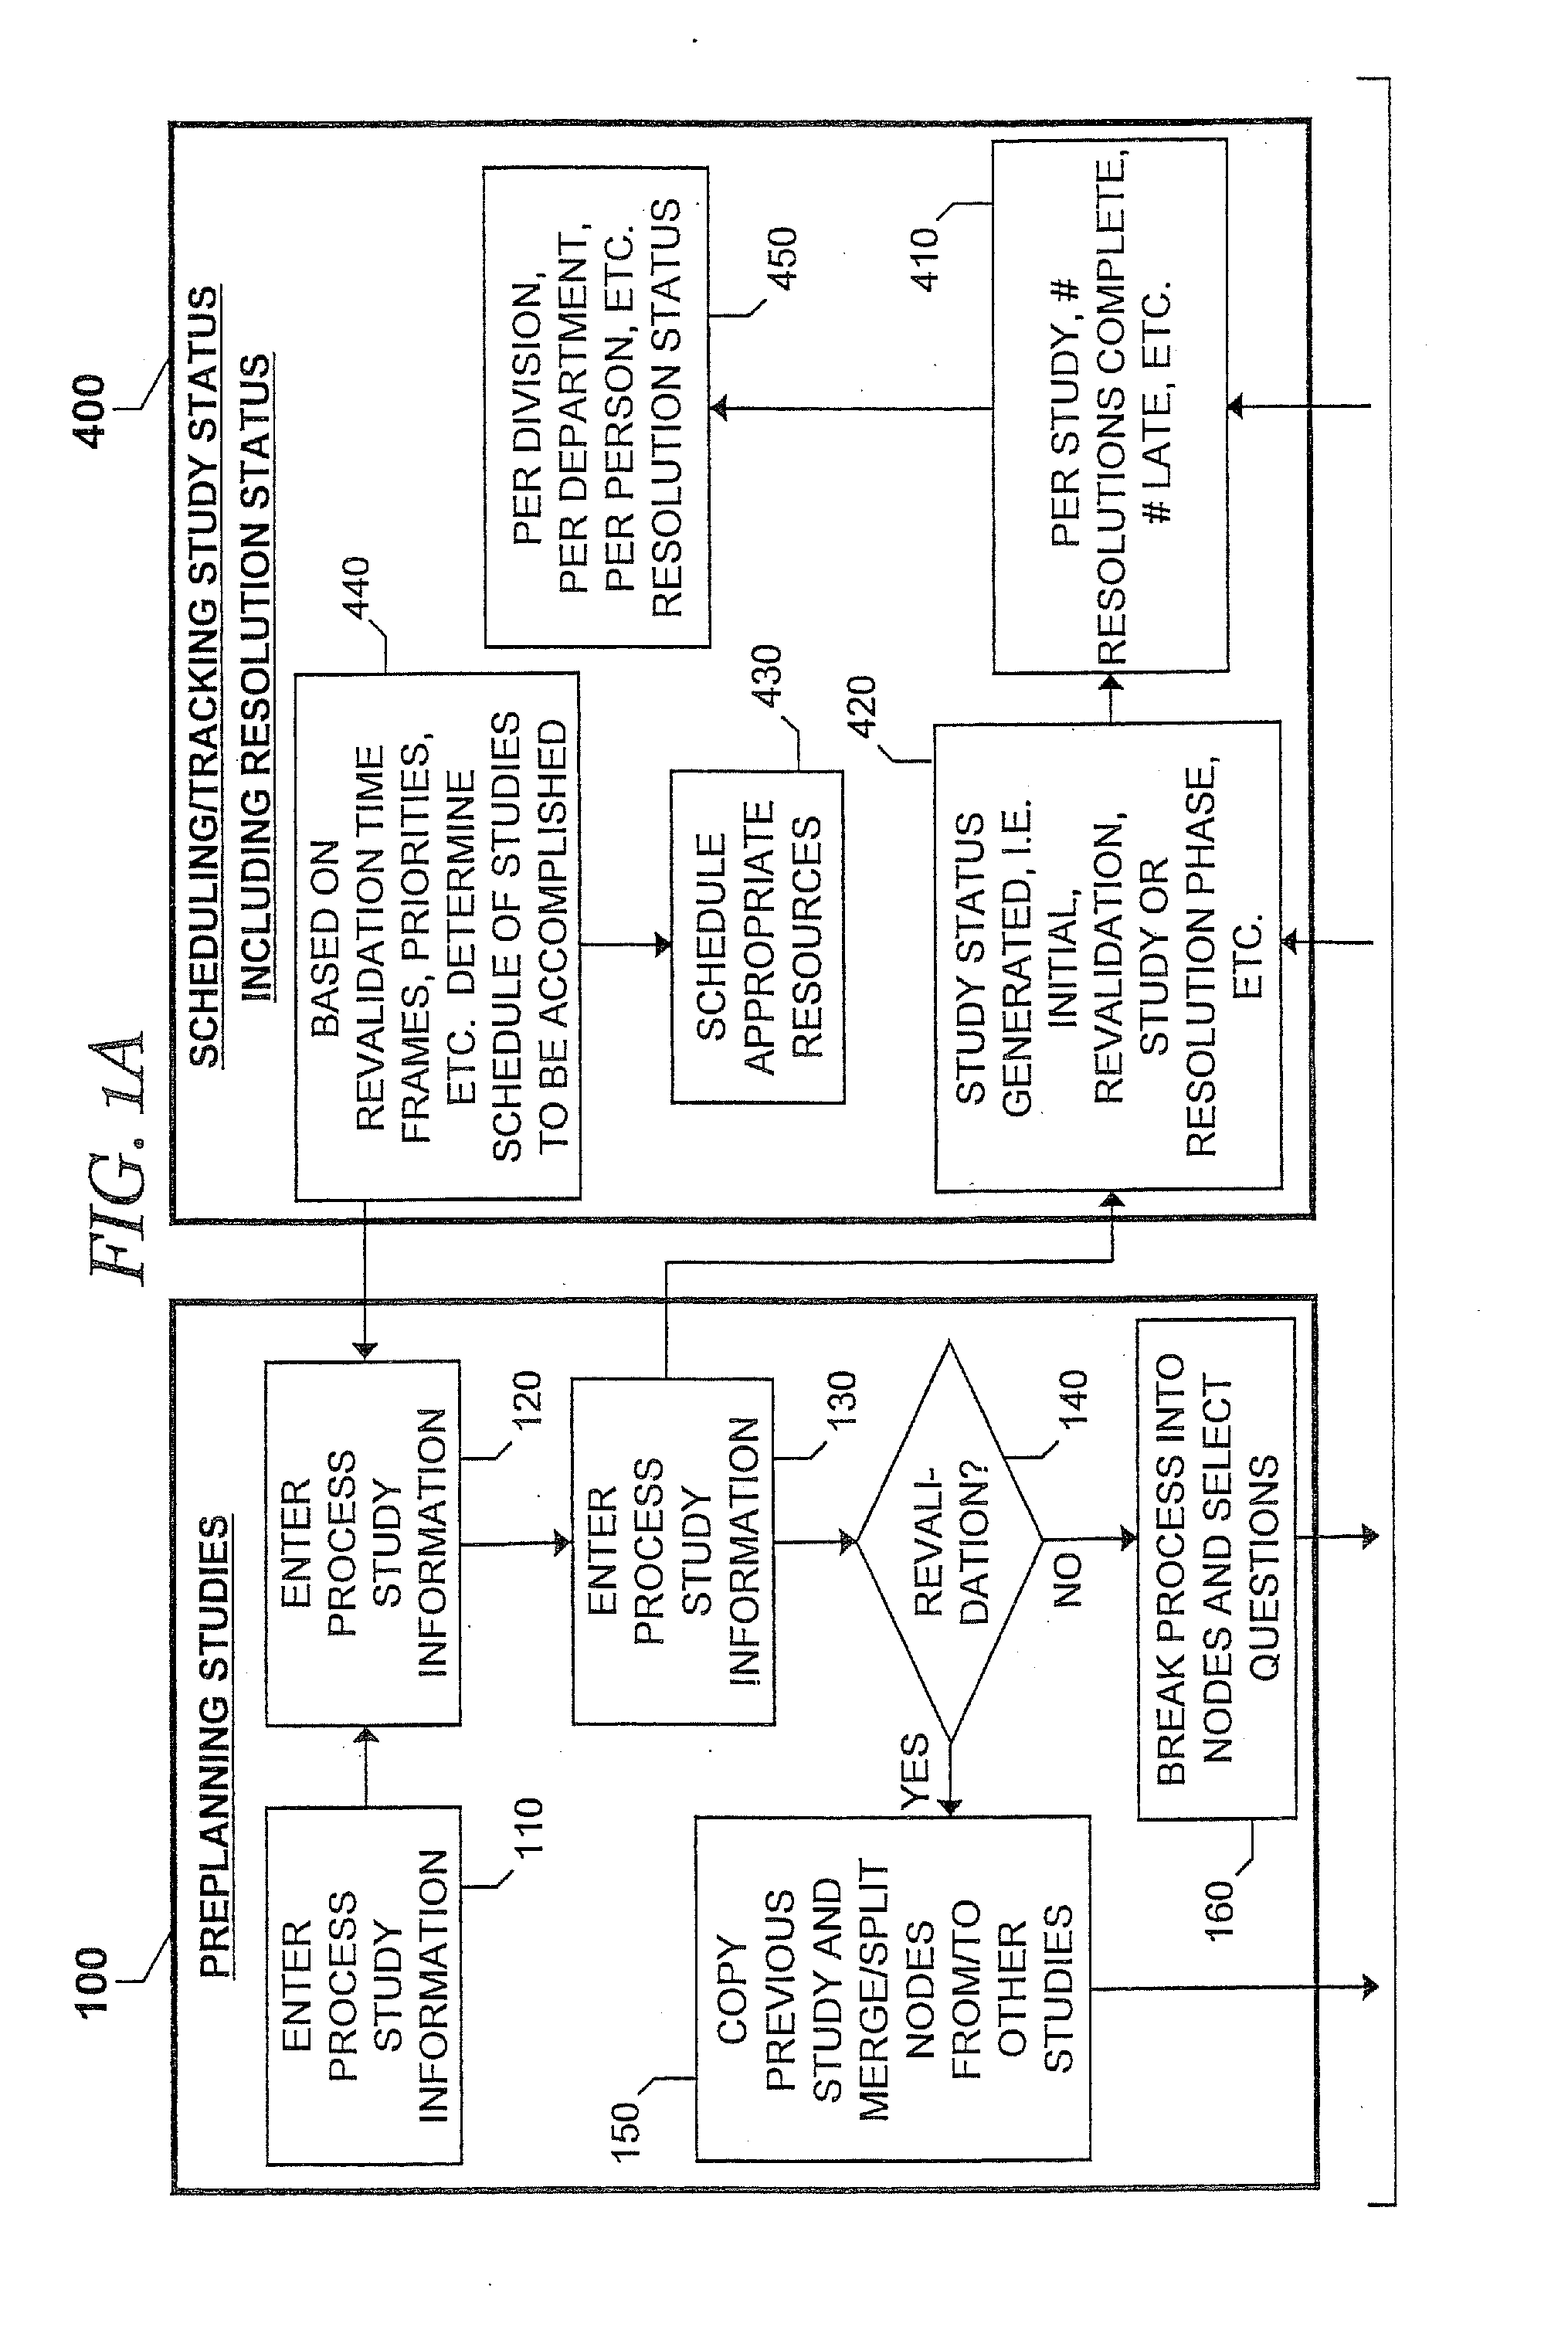 Systems, Methods and Computer Program Products for Preparing, Documenting and Reporting Chemical Process Hazard Analyses